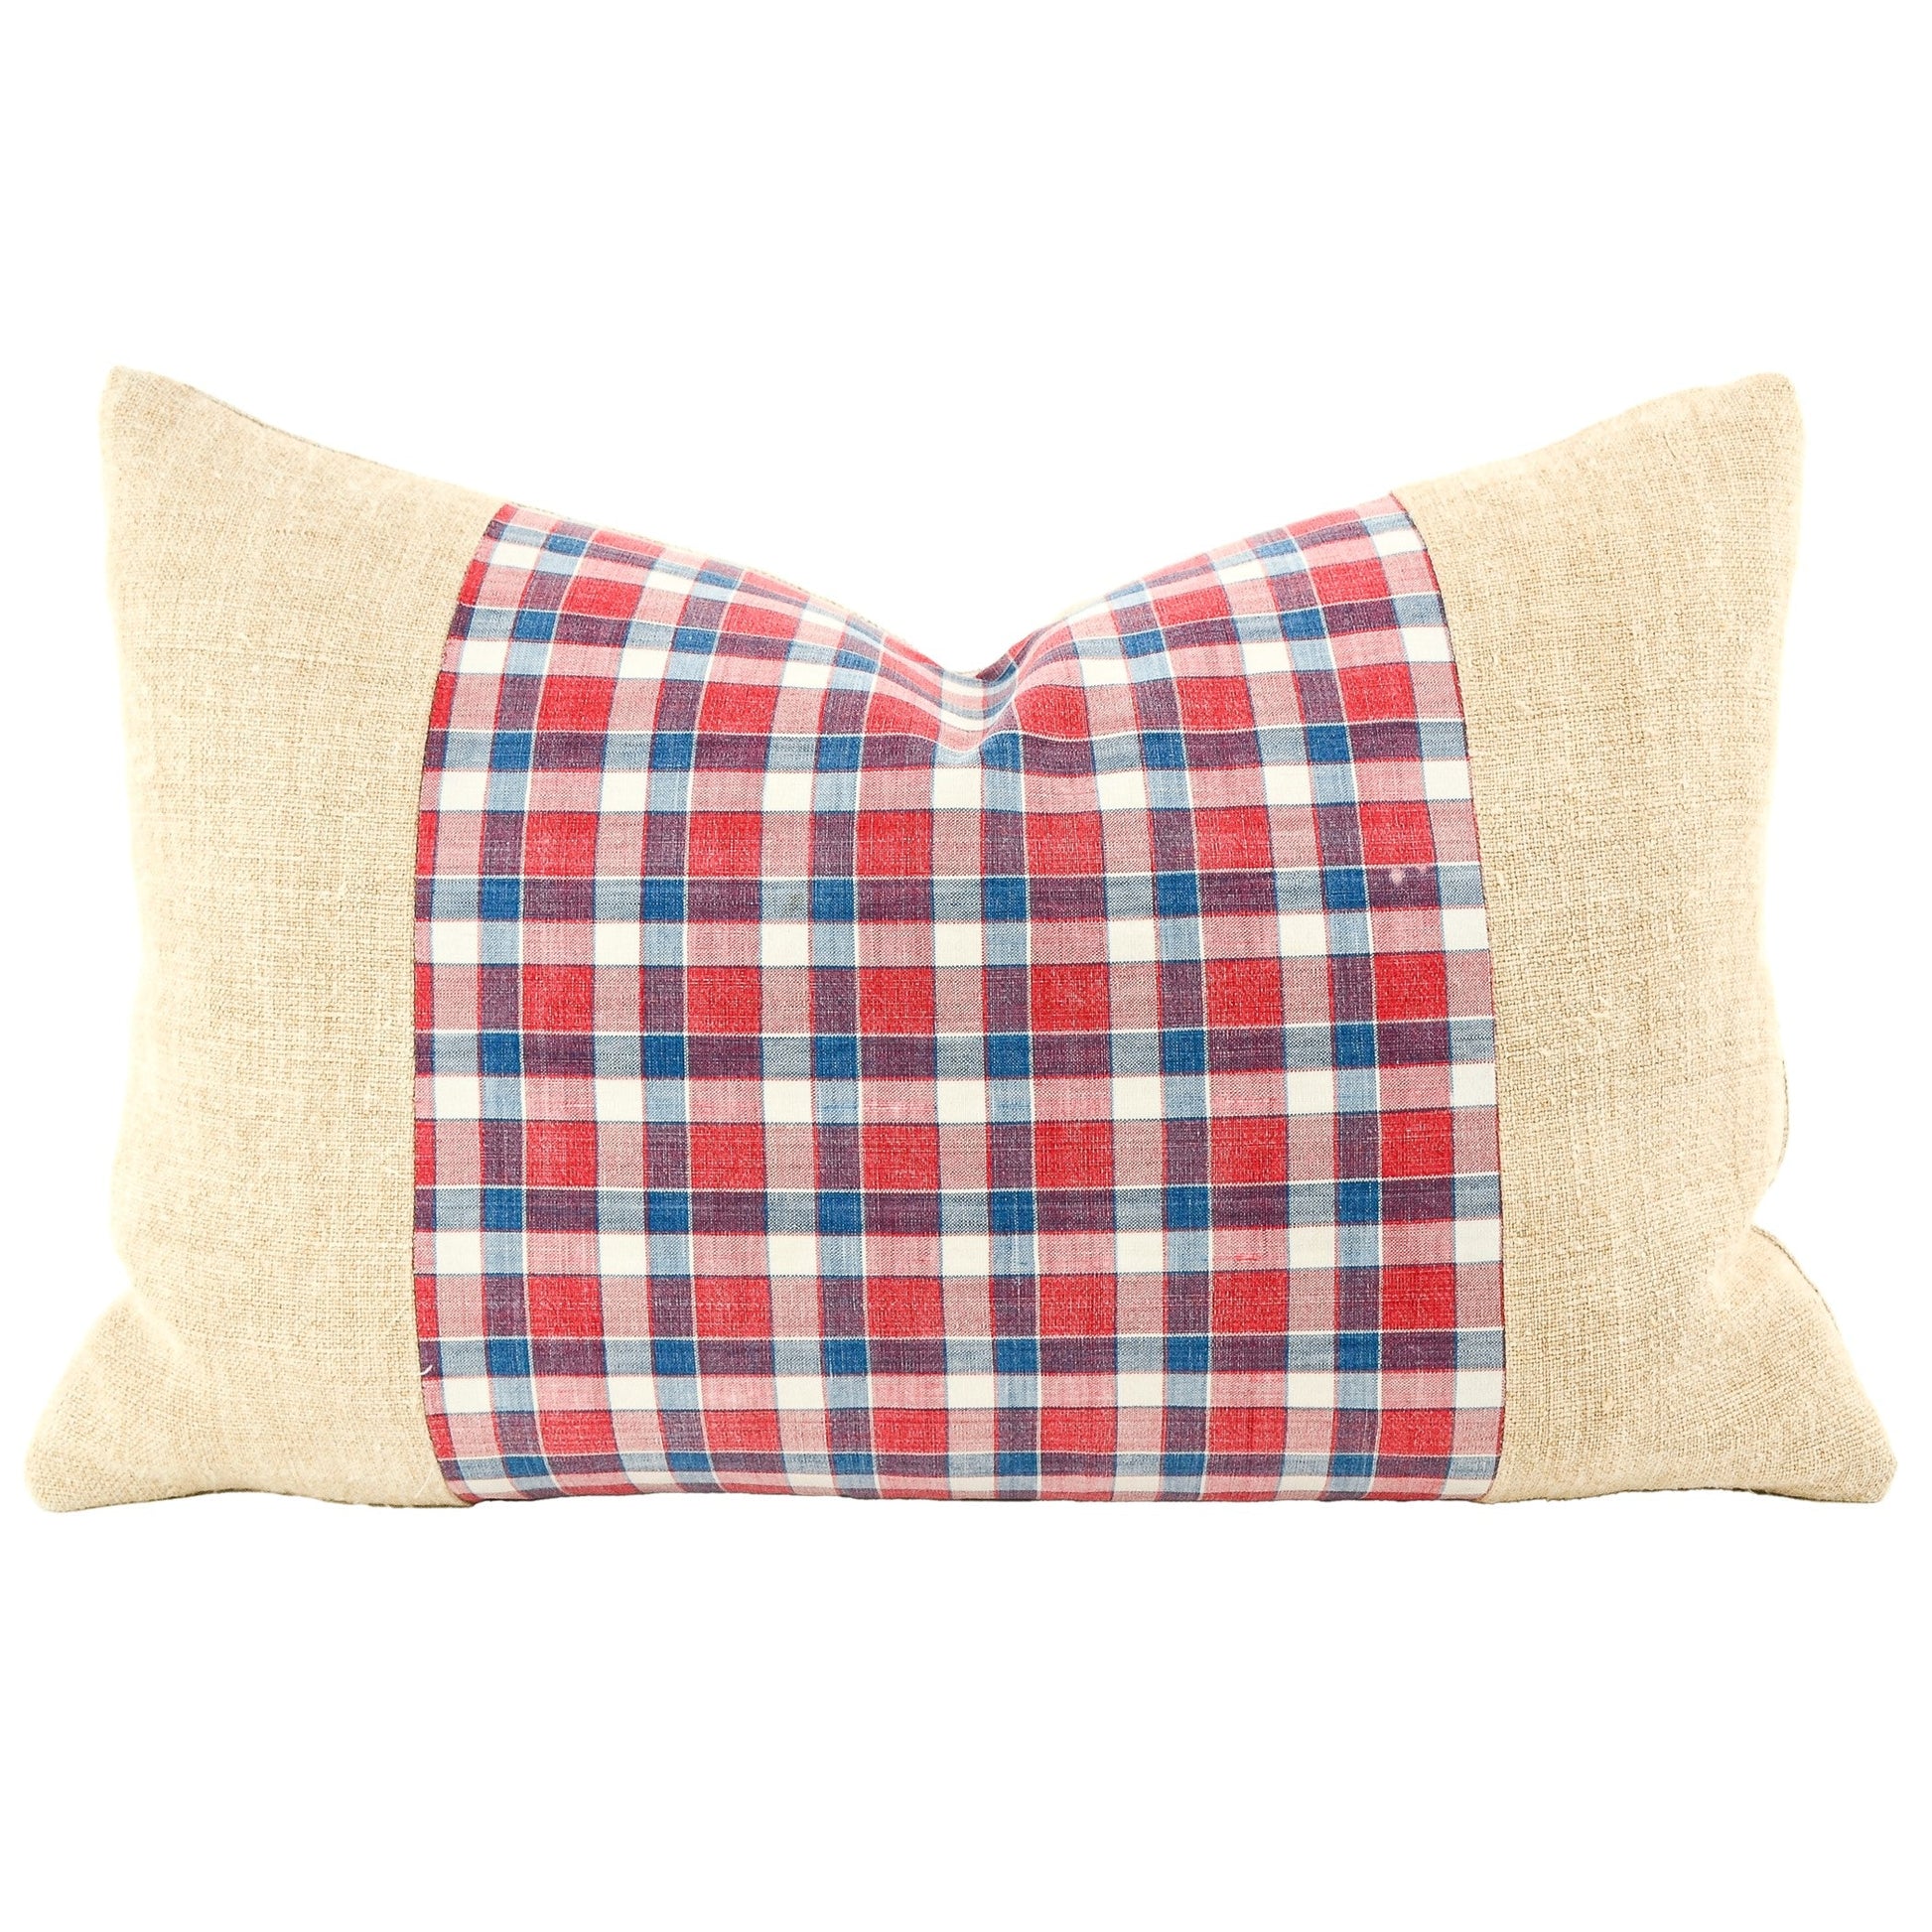 Front of pillow made from a vintage red, blue and white French Kelsch plaid fabric with antique Europeannatural tone grain sack linen on both sides of the plaid